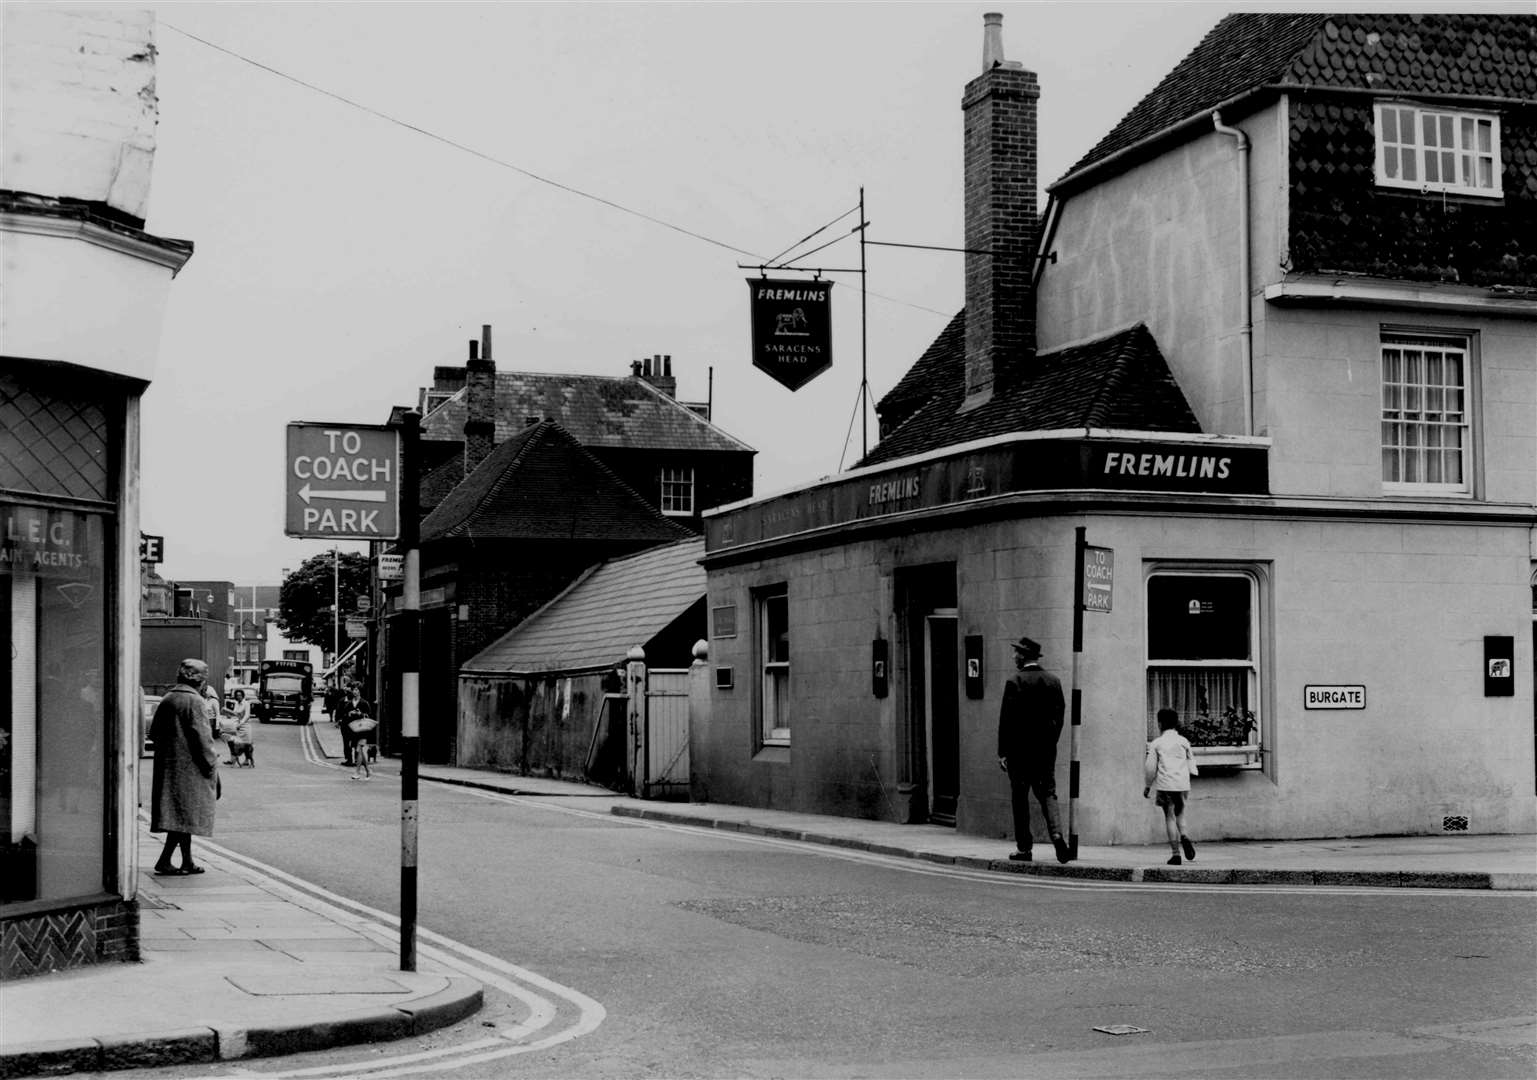 Pilch took over the Saracens Head pub on the corner of Burgate, pictured here in 1968 - a year before its demolition. File picture used in Images of Canterbury book page 22